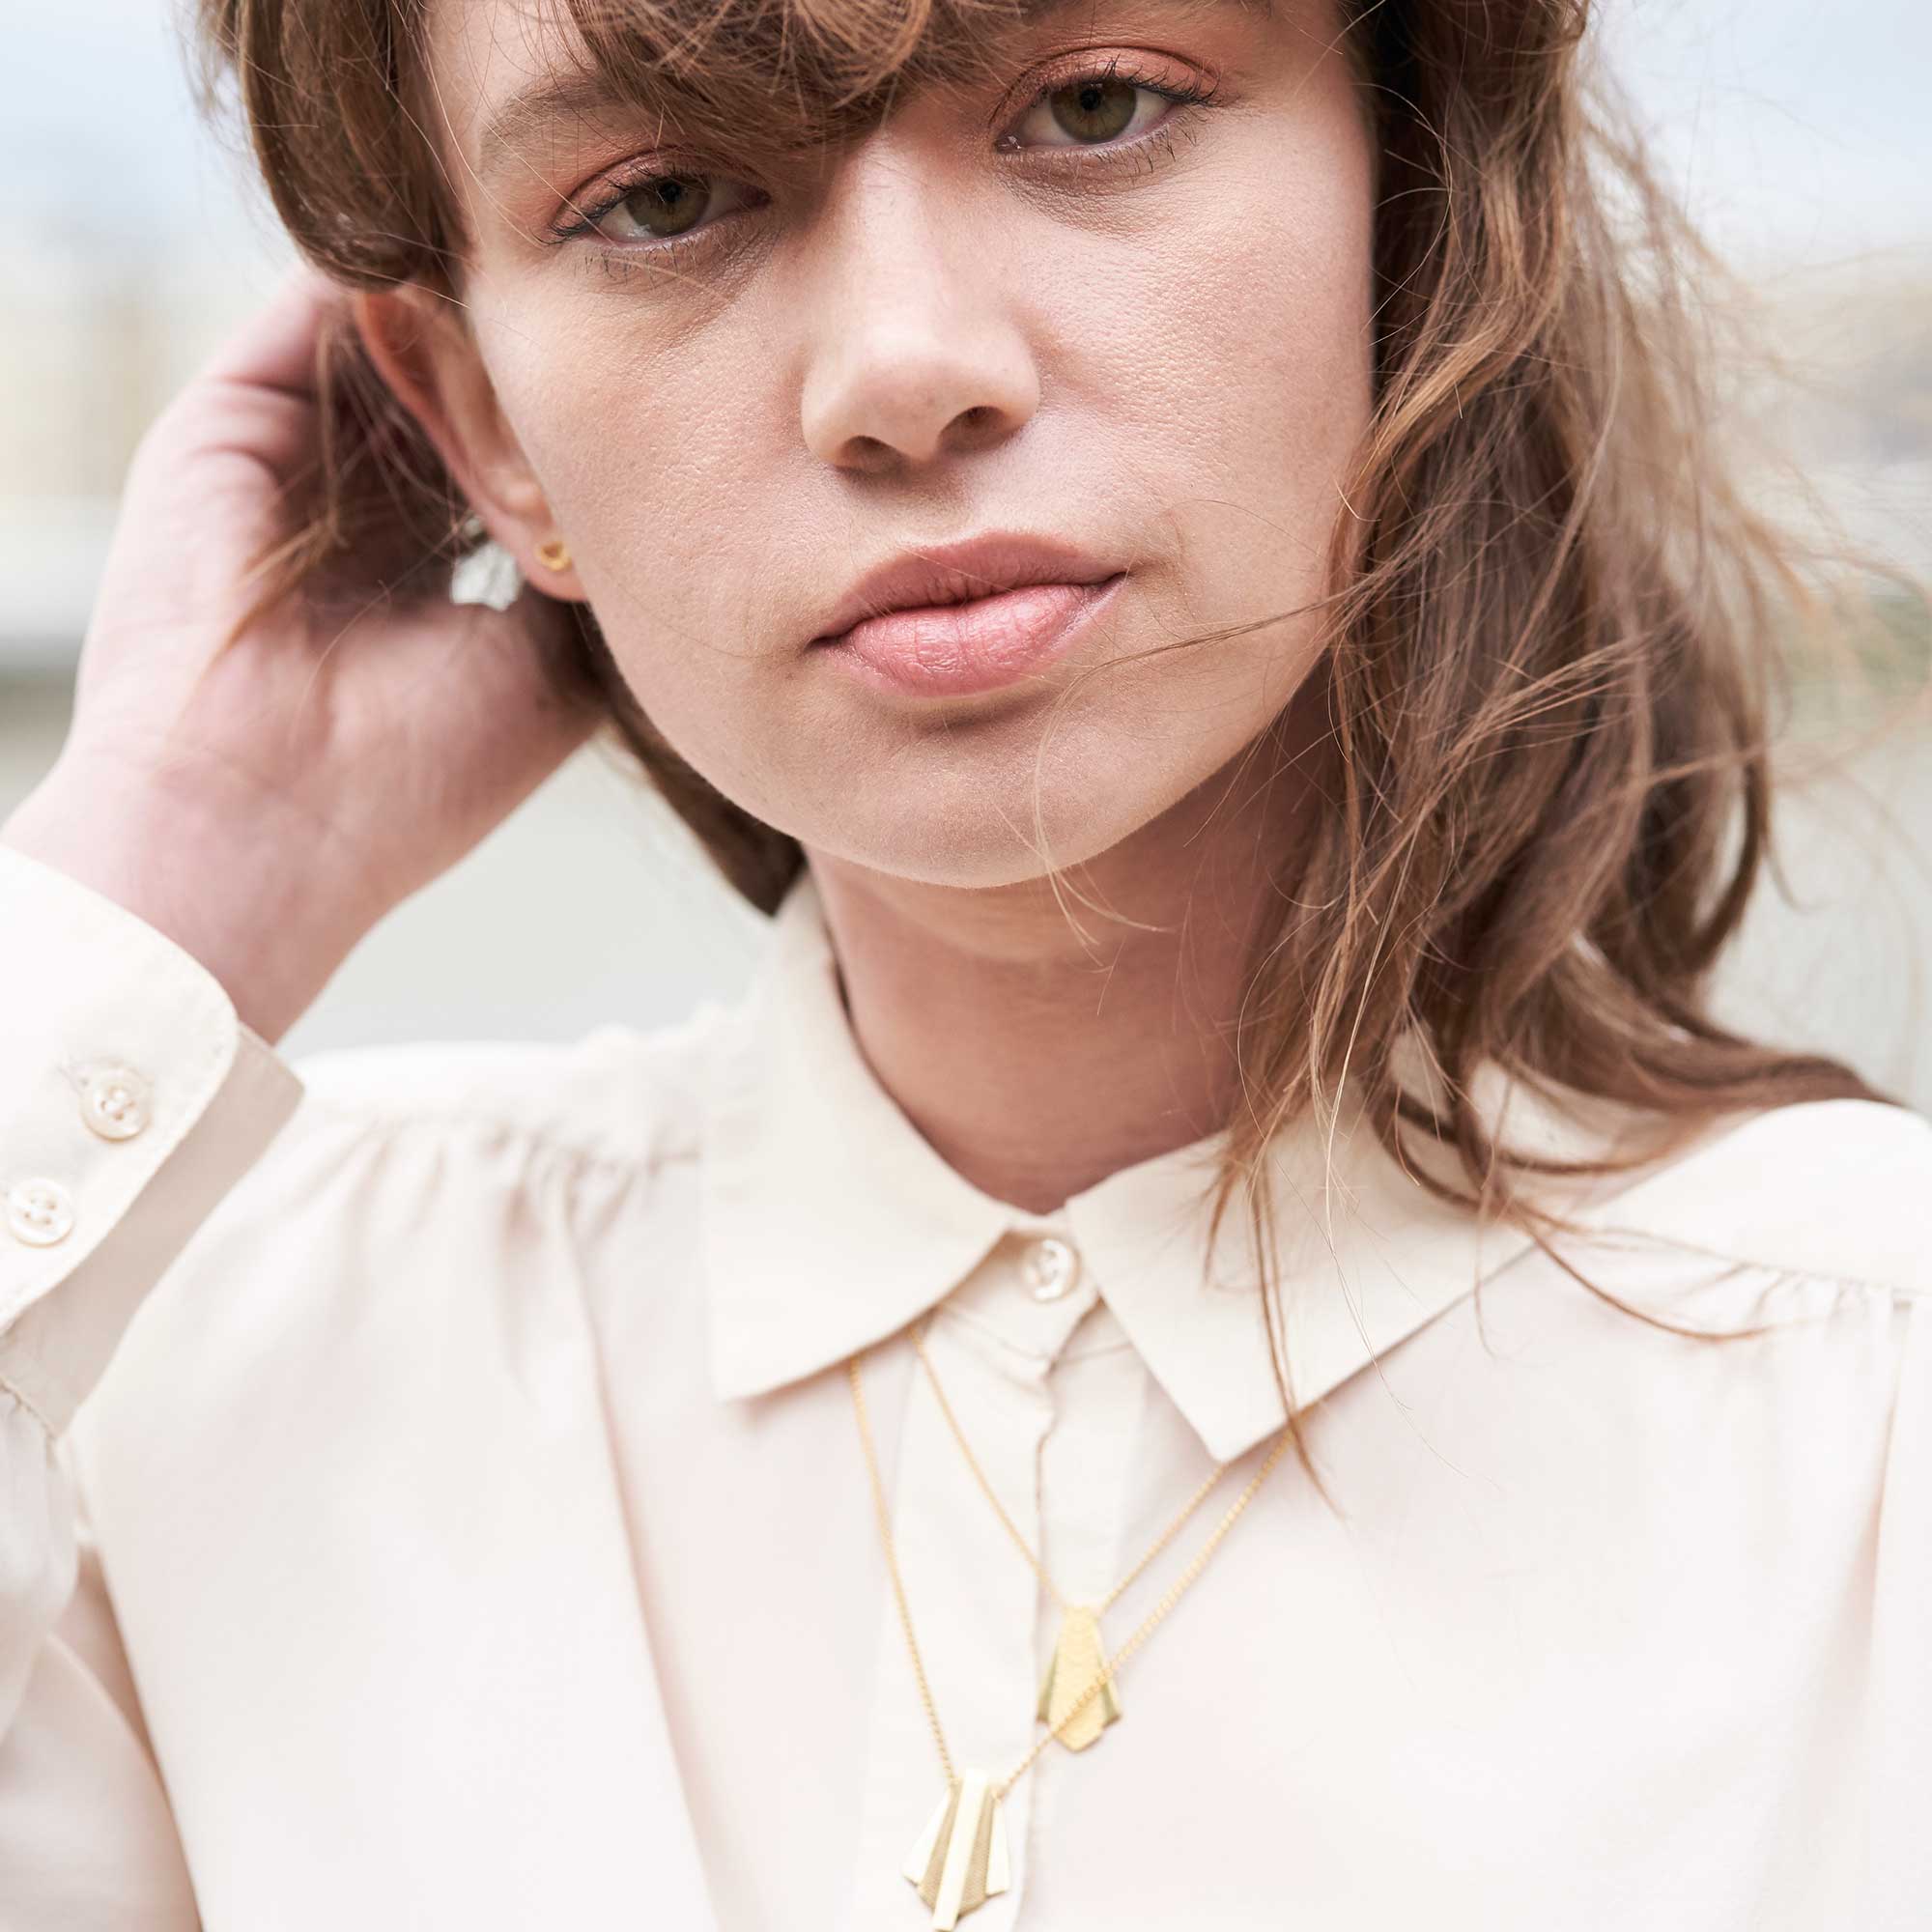 2 gold geometric pendant necklaces worn by model